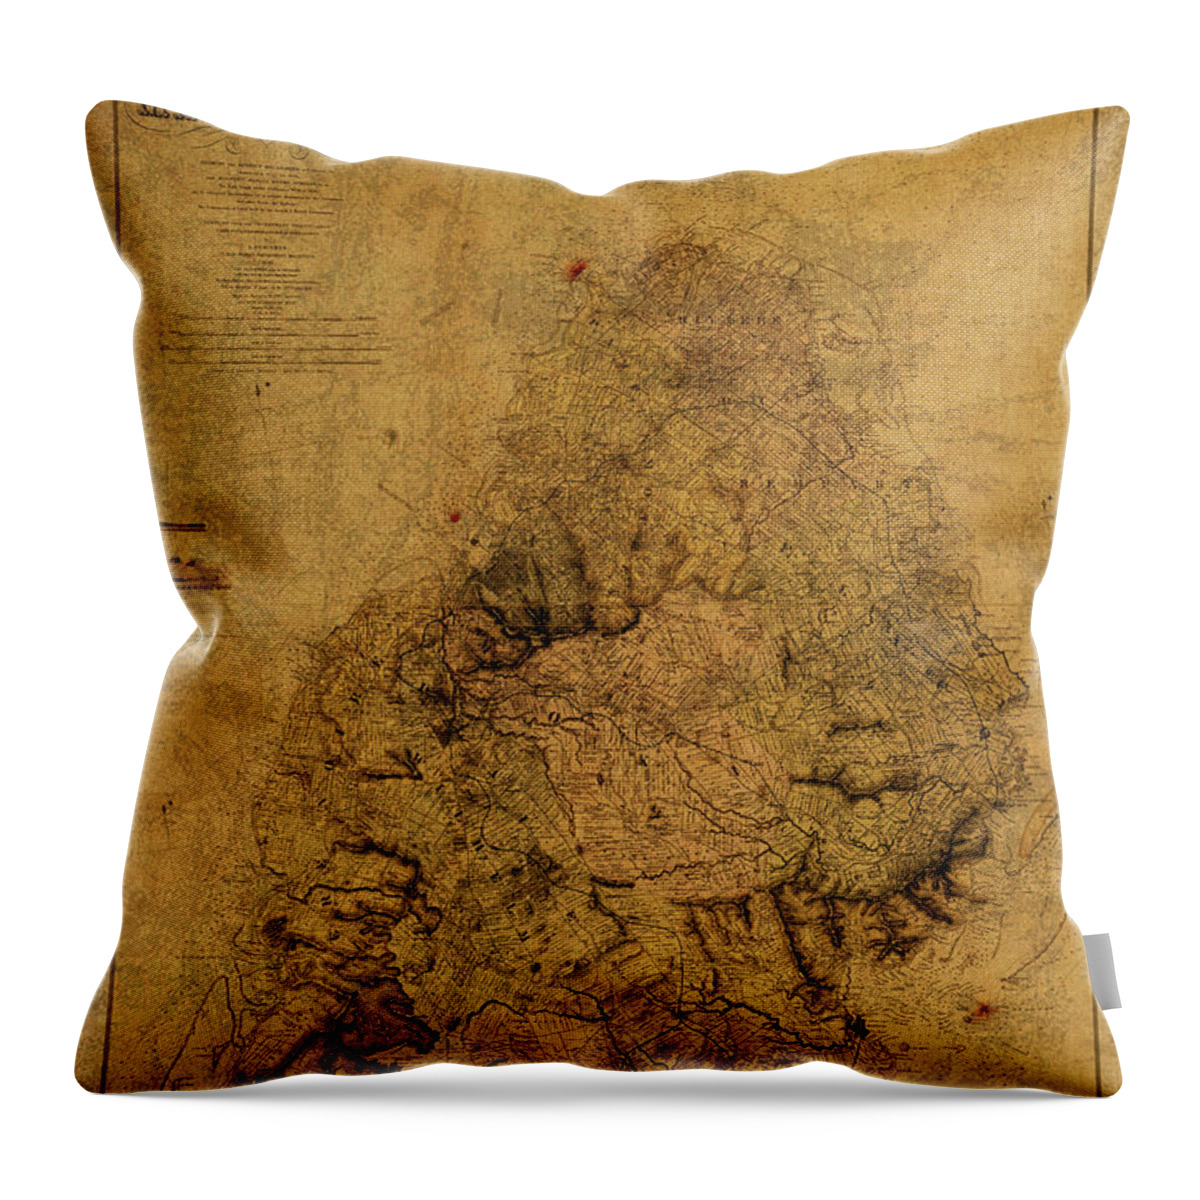 Vintage Throw Pillow featuring the mixed media Vintage Map of Mauritius 1880 by Design Turnpike